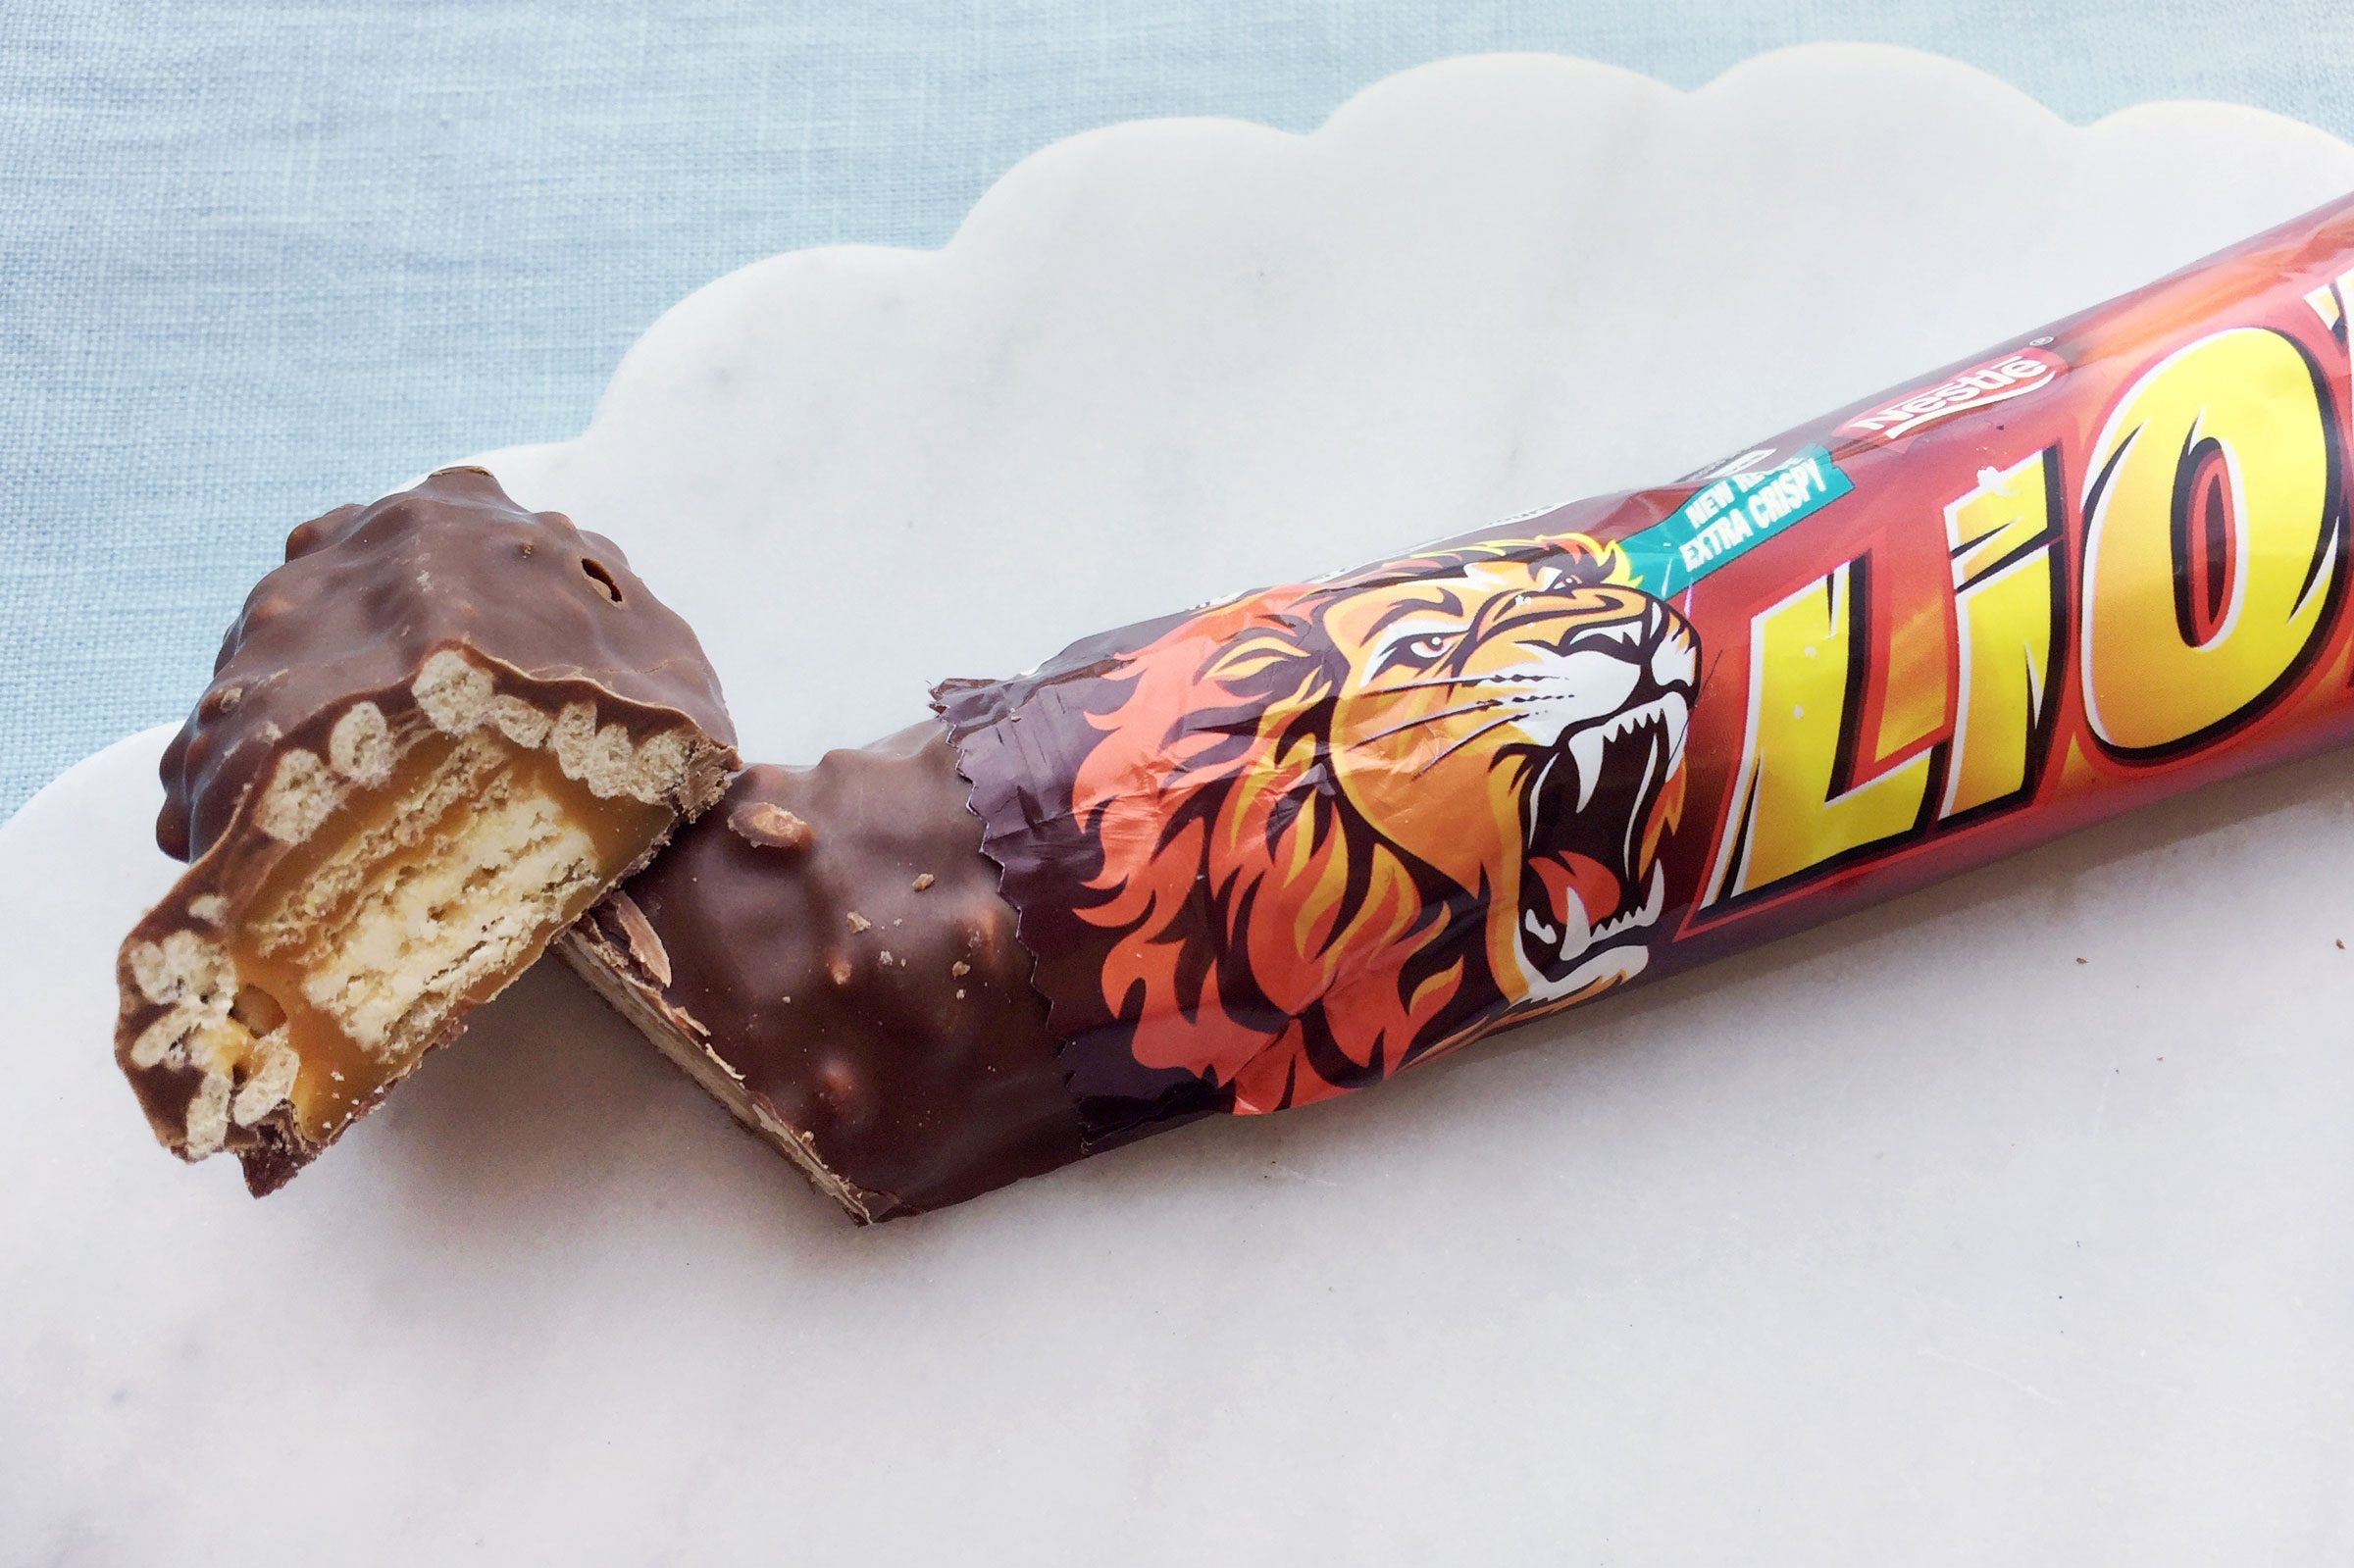 Lion chocolate Bar on a marble surface with a blue table cloth